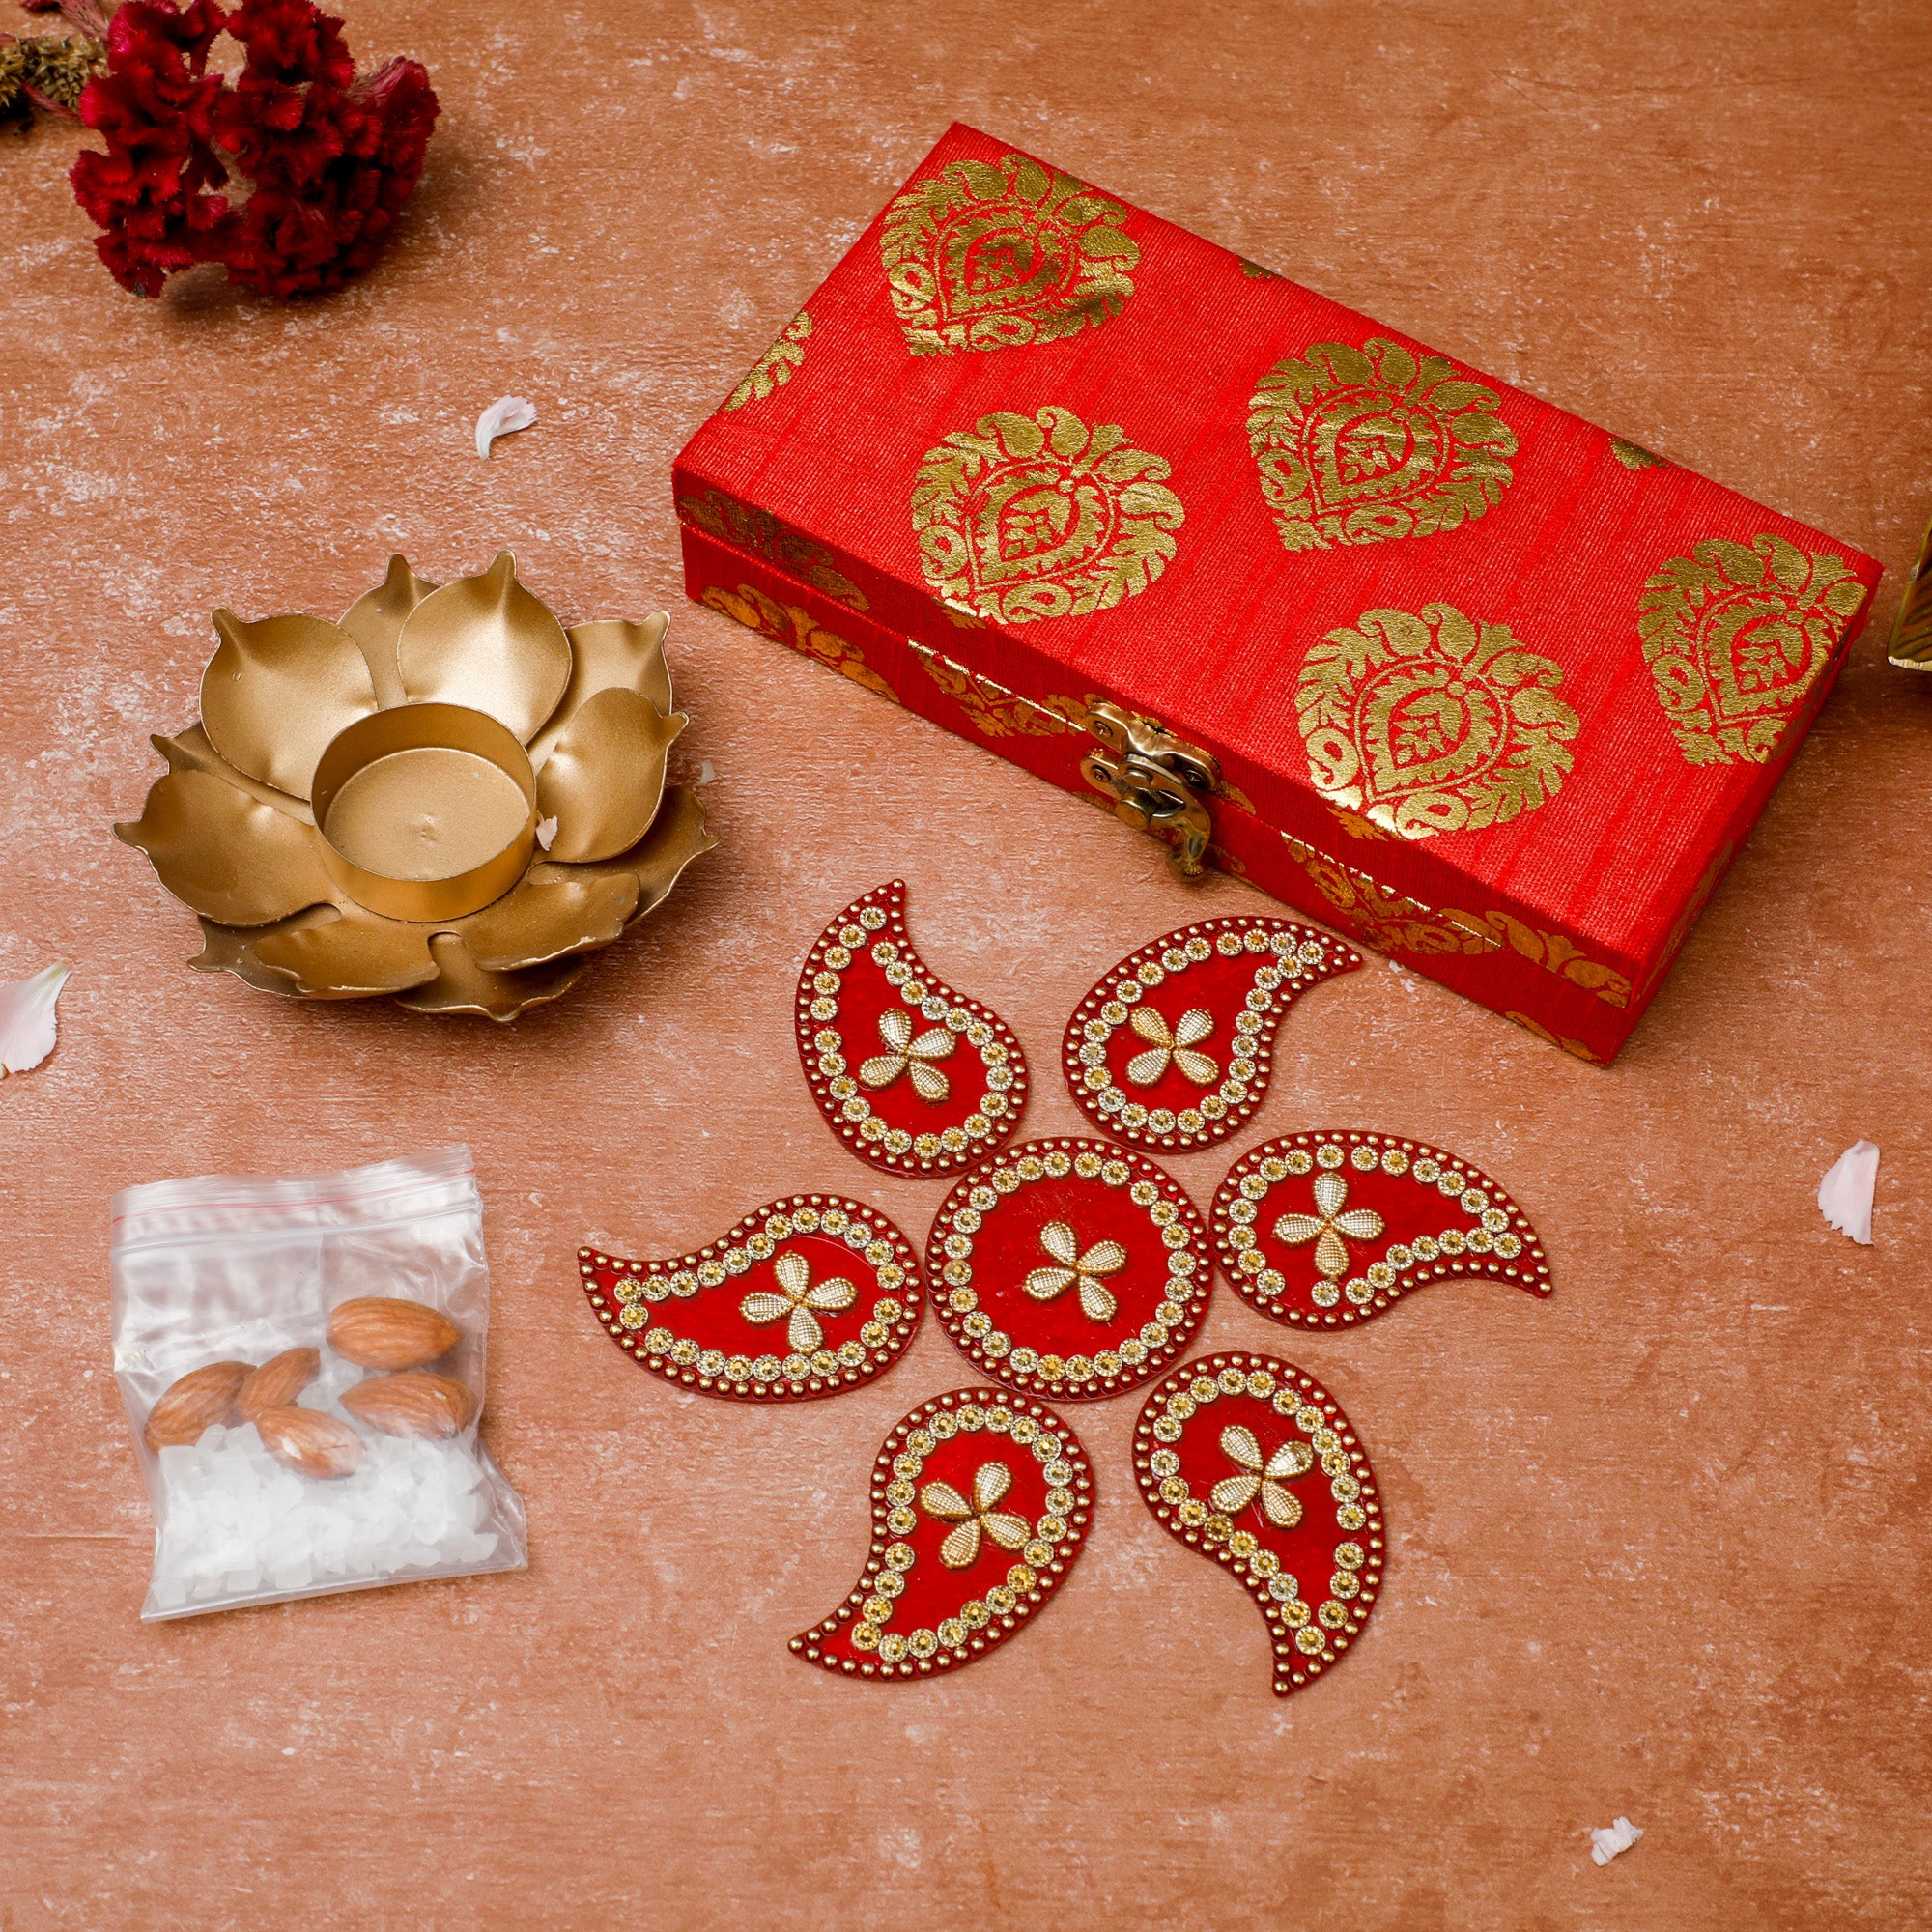 Celebrate Diwali With Interesting Gifts